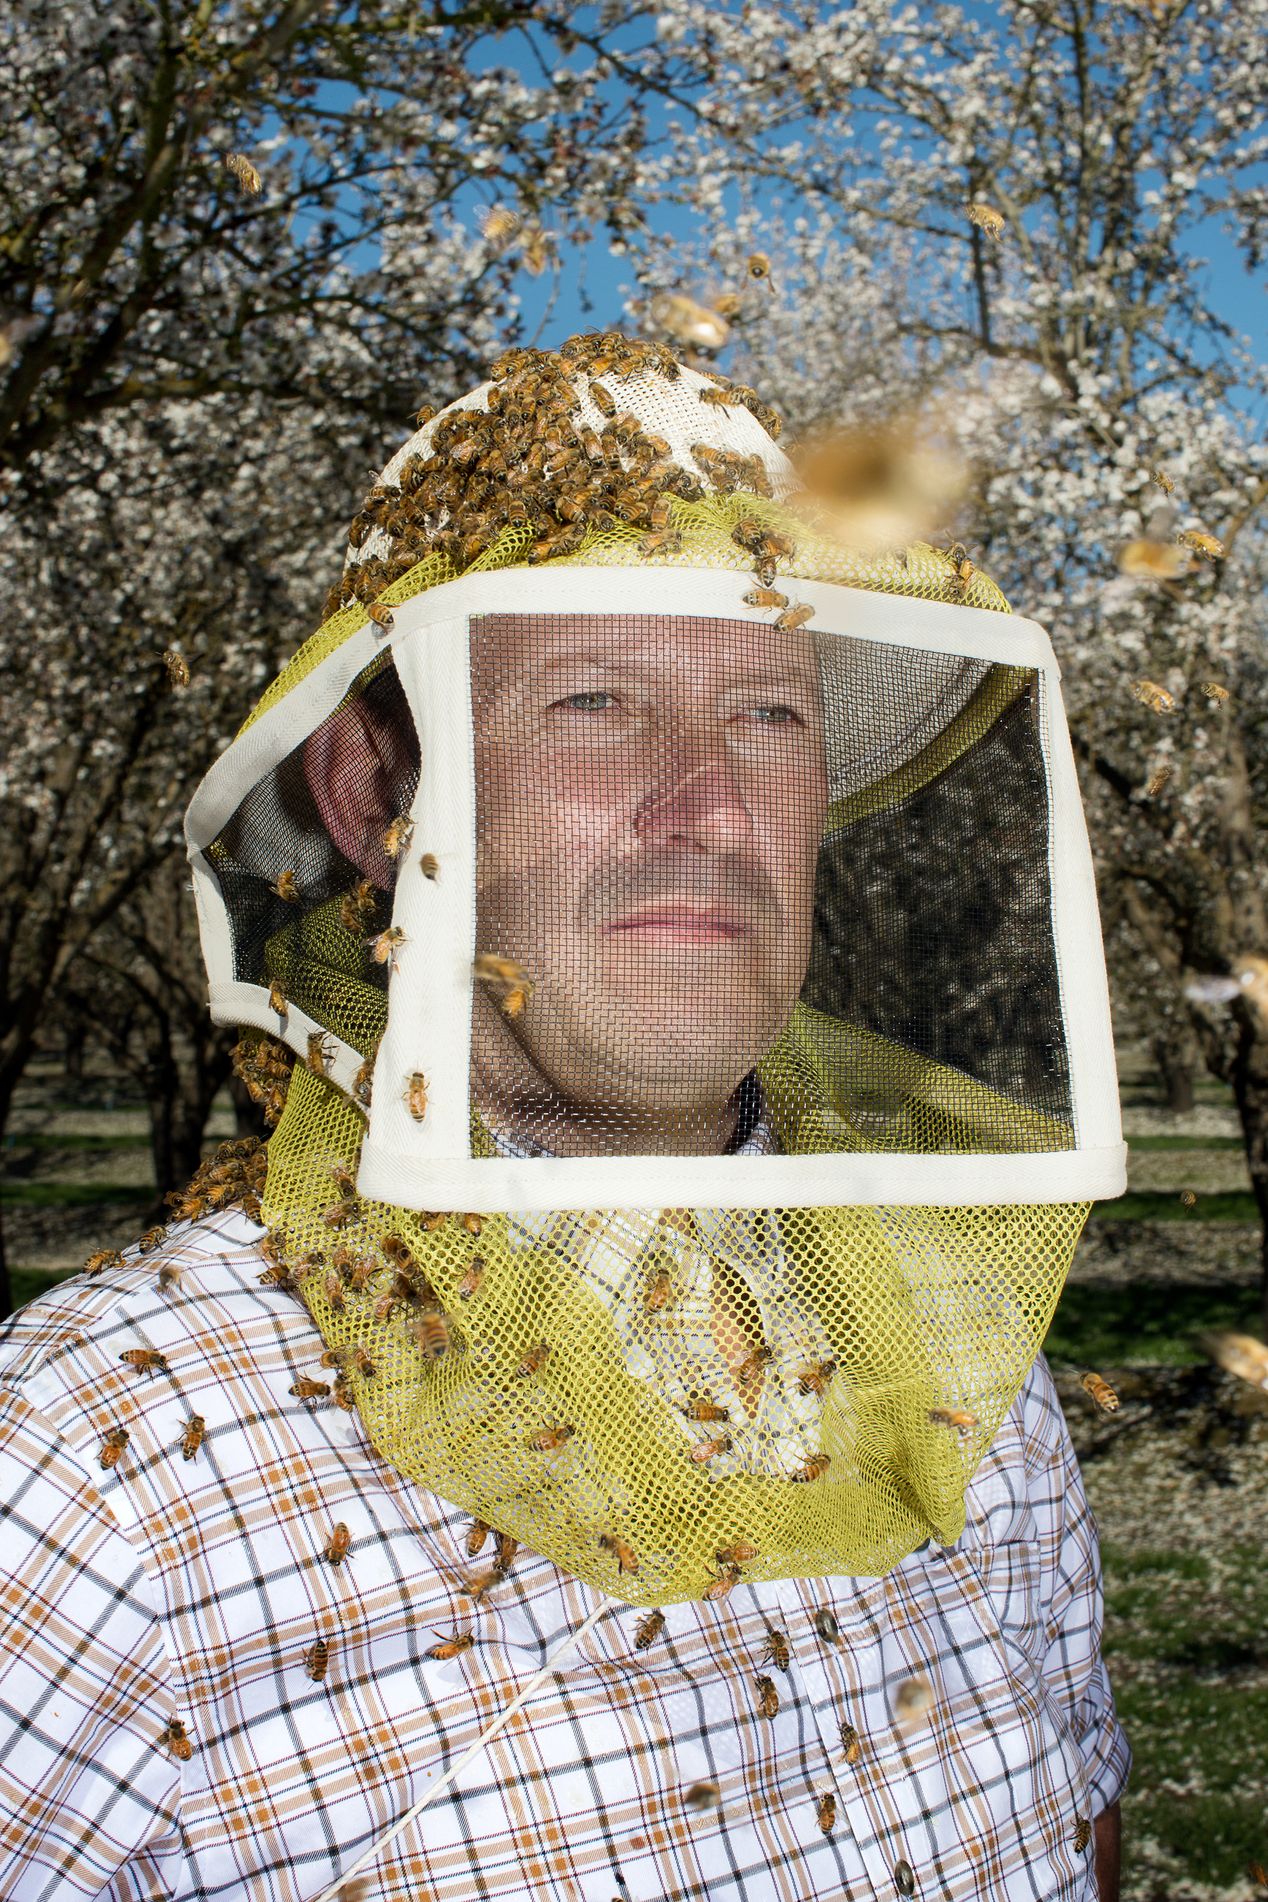 Beekeeper in Central Valley, California, Ilona Szwarc, Los Angeles editorial photographer. 